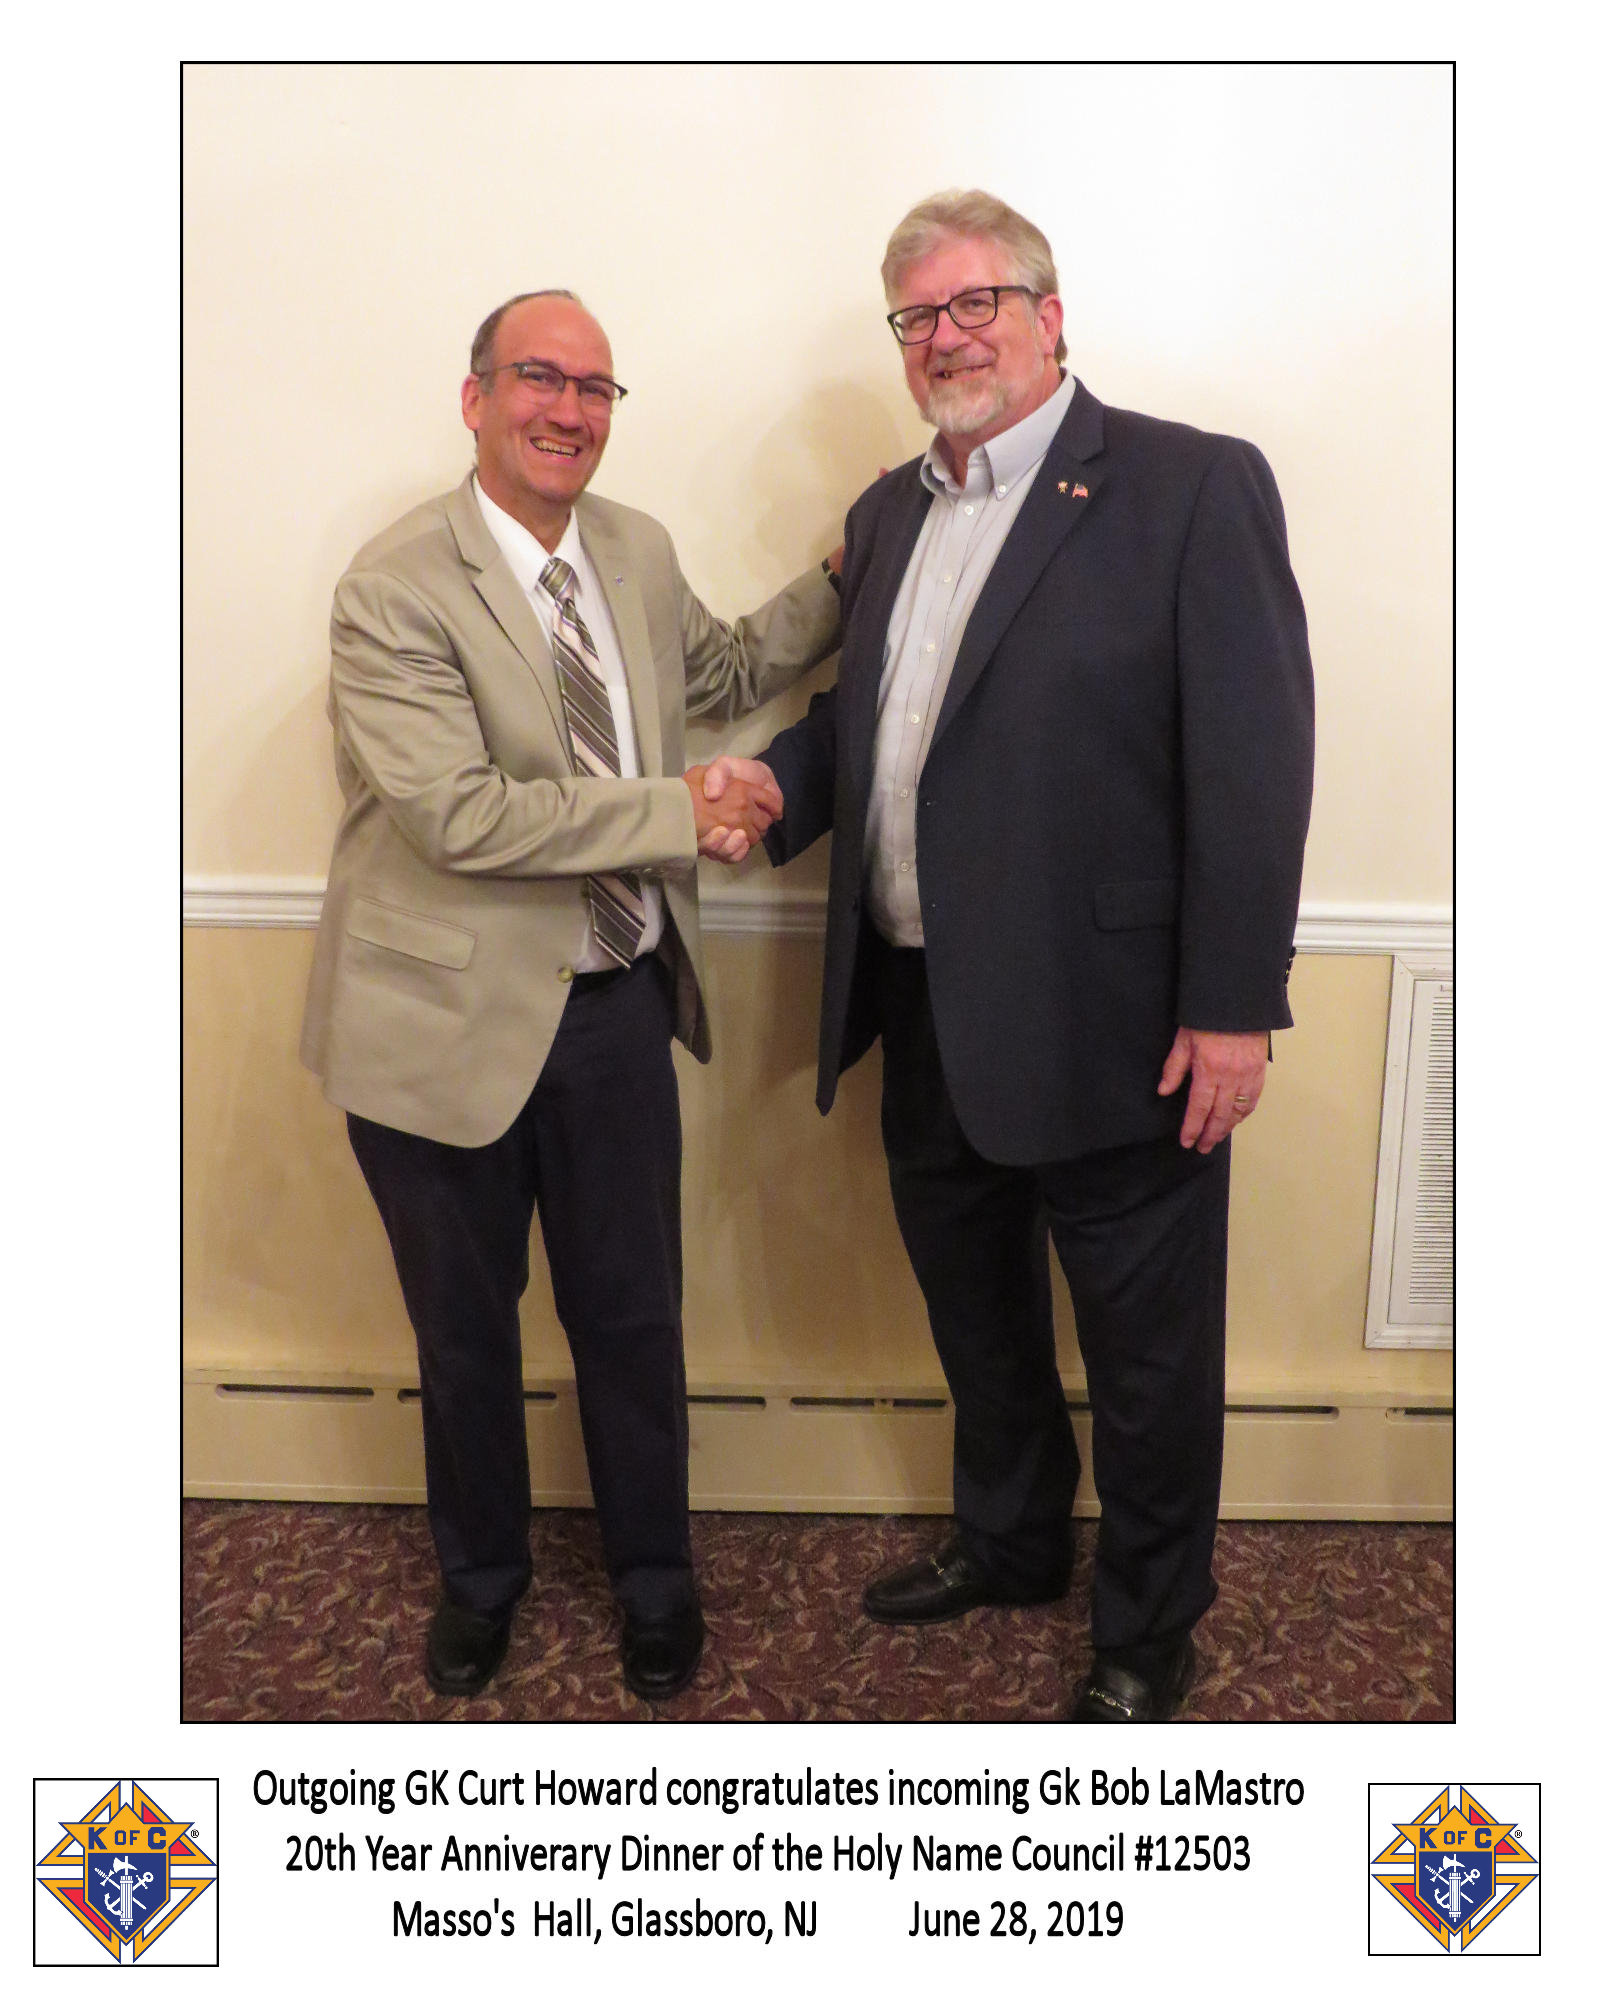 2019 - PGK Curt Howard passes the Council Reins over to GK Bob LaMastro